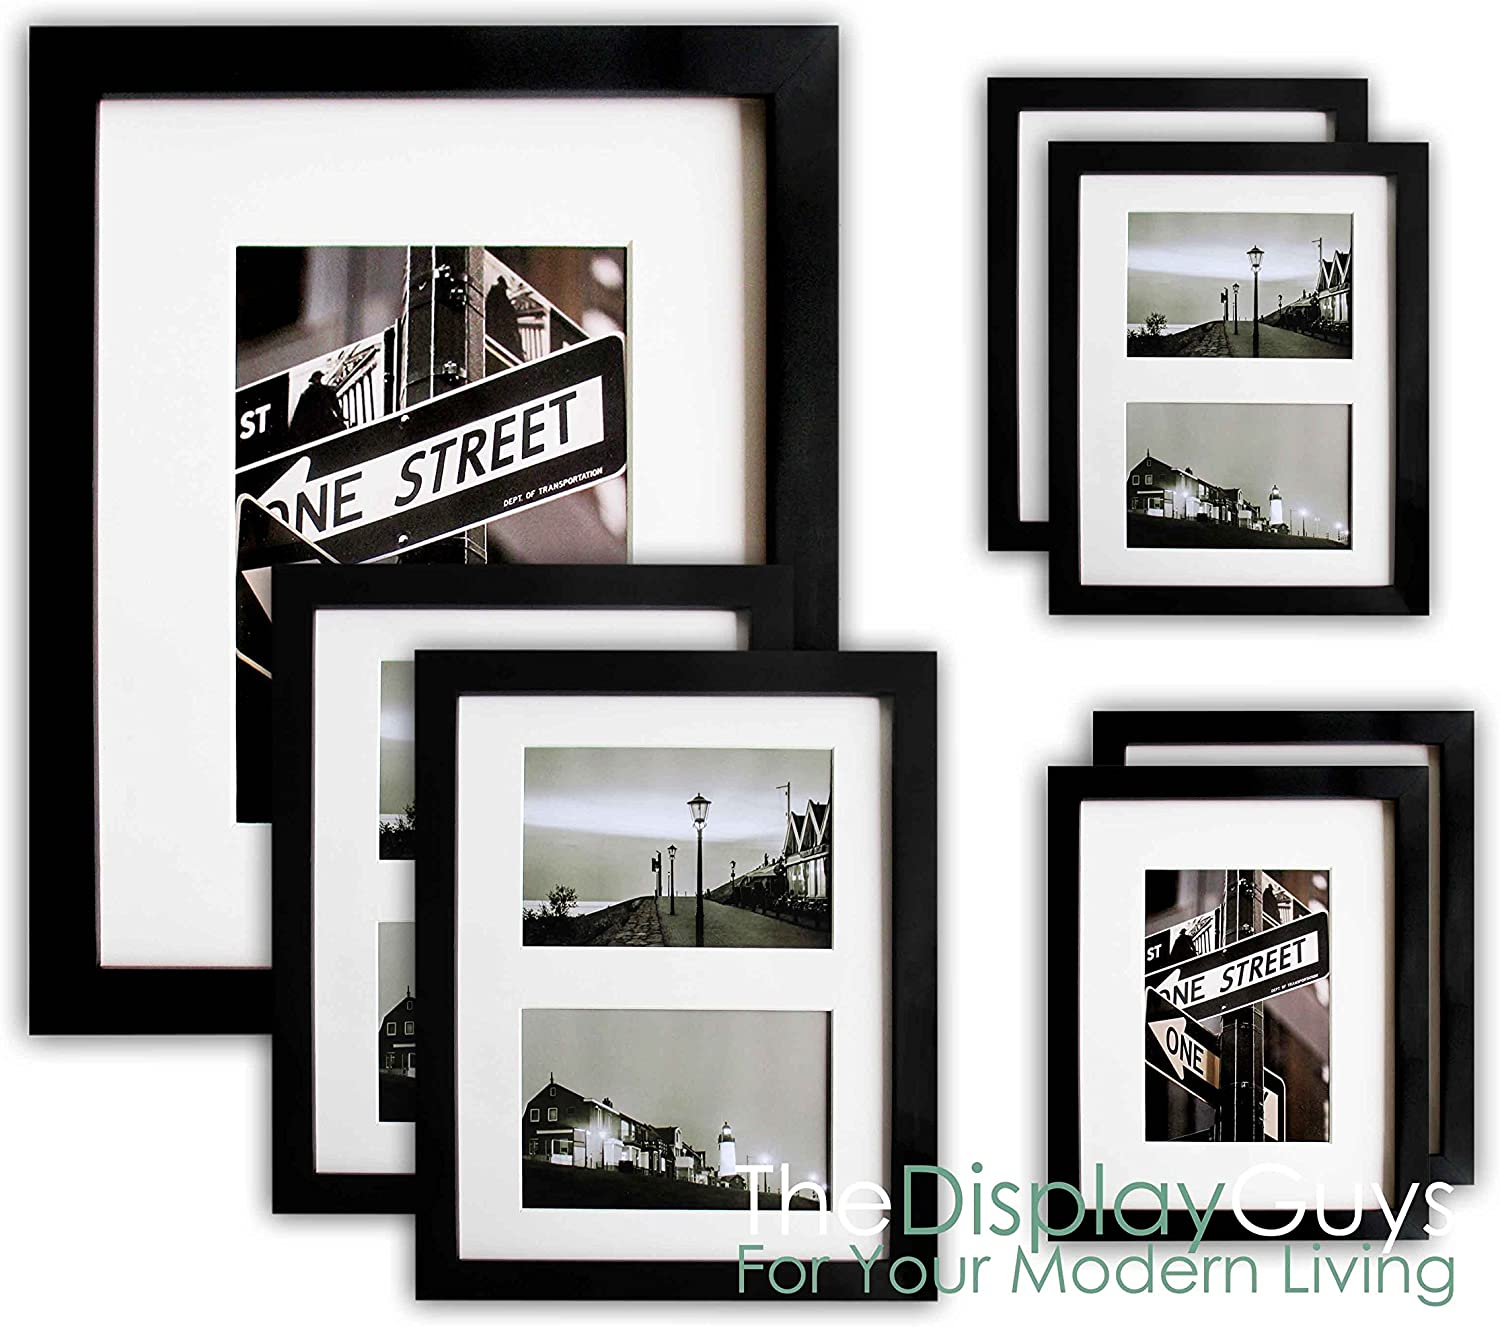 https://cdn.shopify.com/s/files/1/0311/7953/8569/products/7-piece-black-solid-pine-wood-collage-multi-size-picture-frame-set-with-16-x-20-frame.jpg?v=1611253640